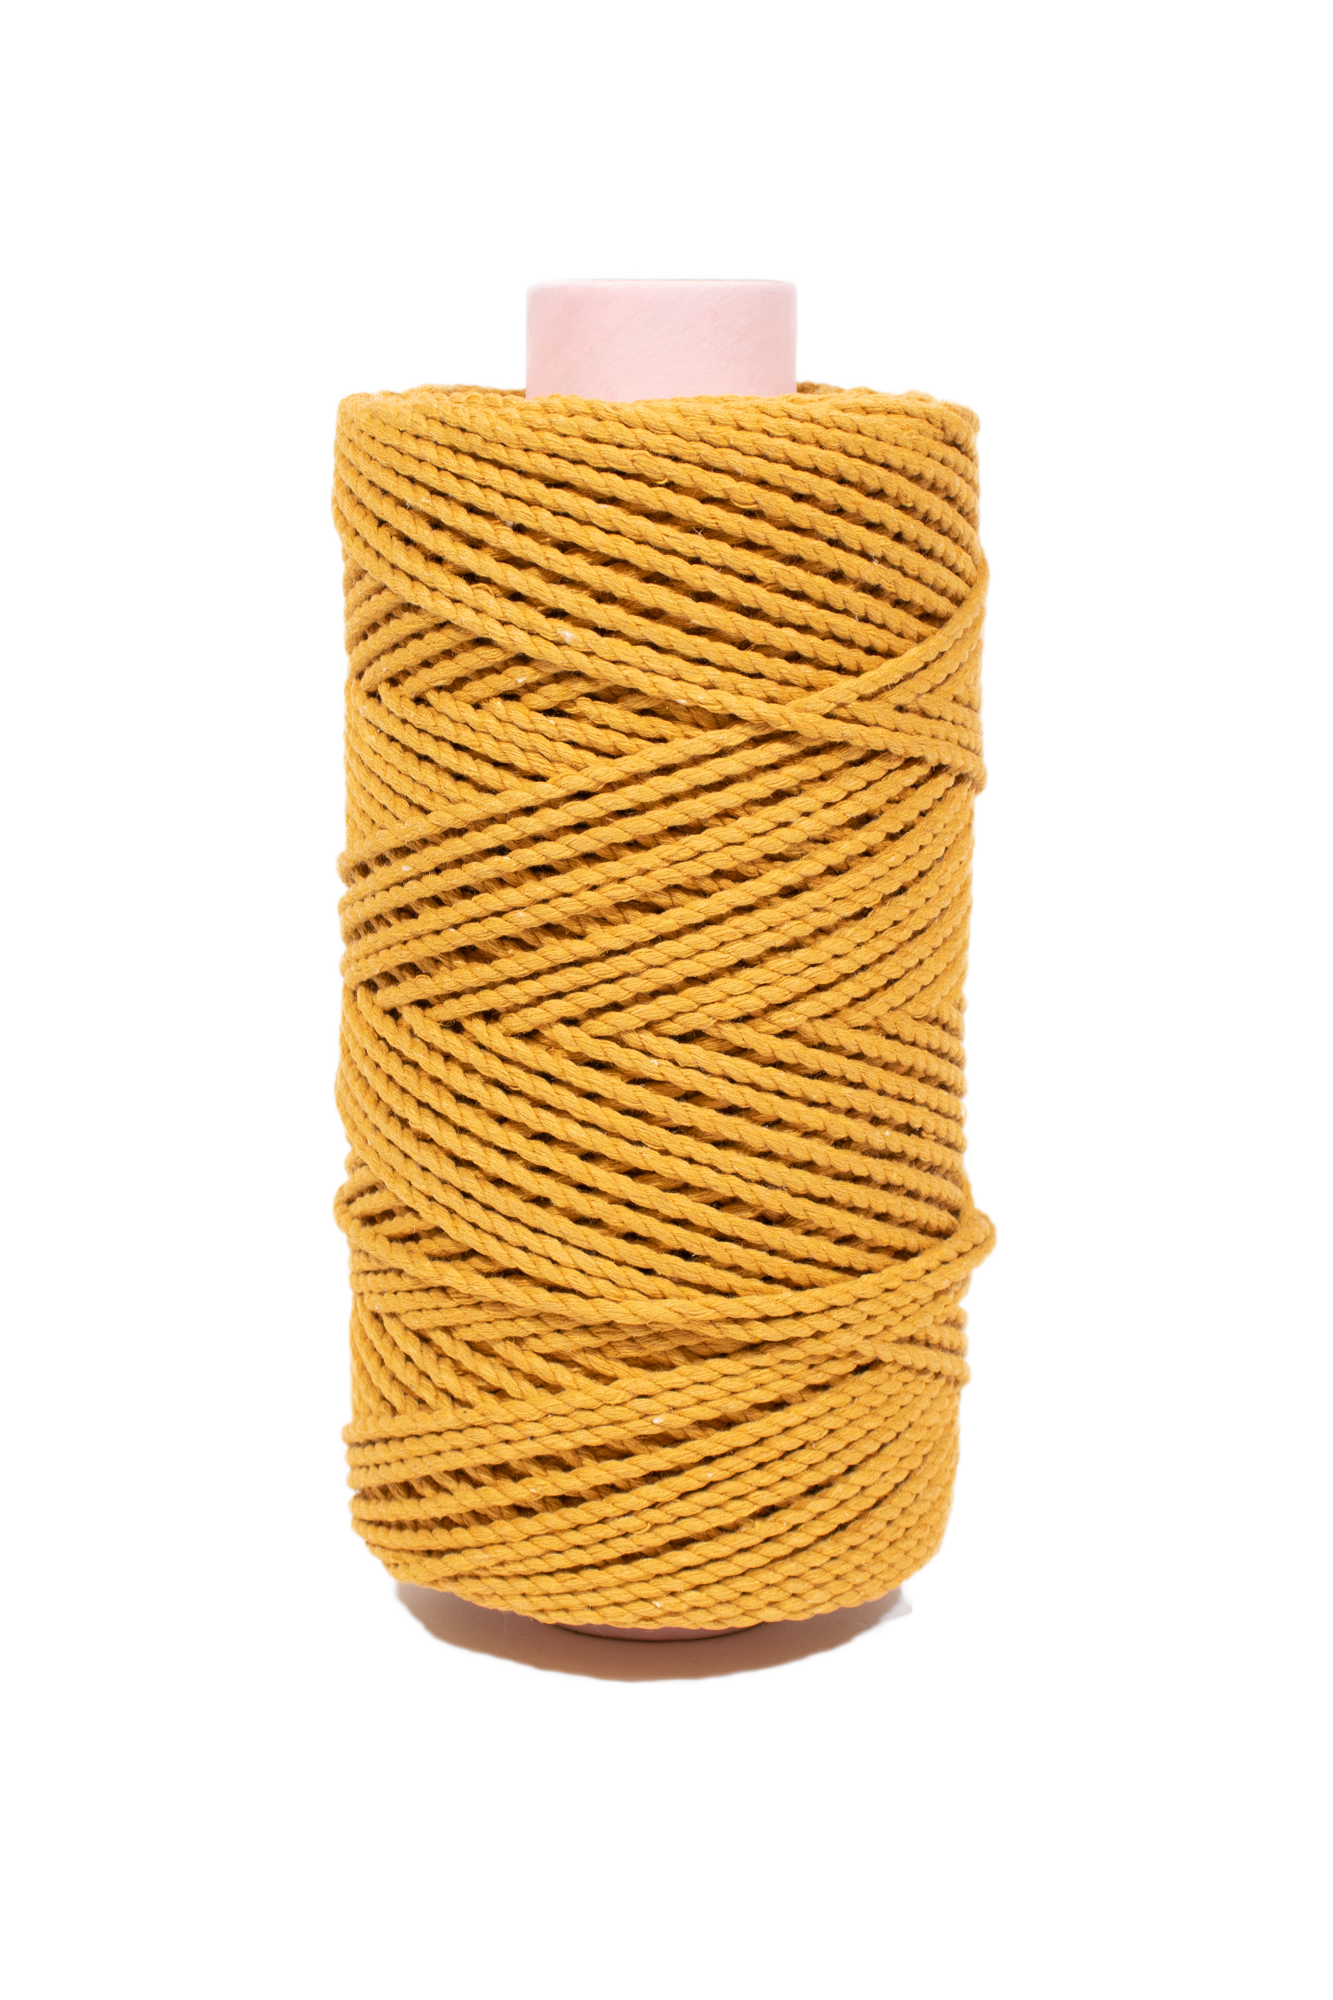 3mm 100% Recycled Cotton Rope - 500ft spool